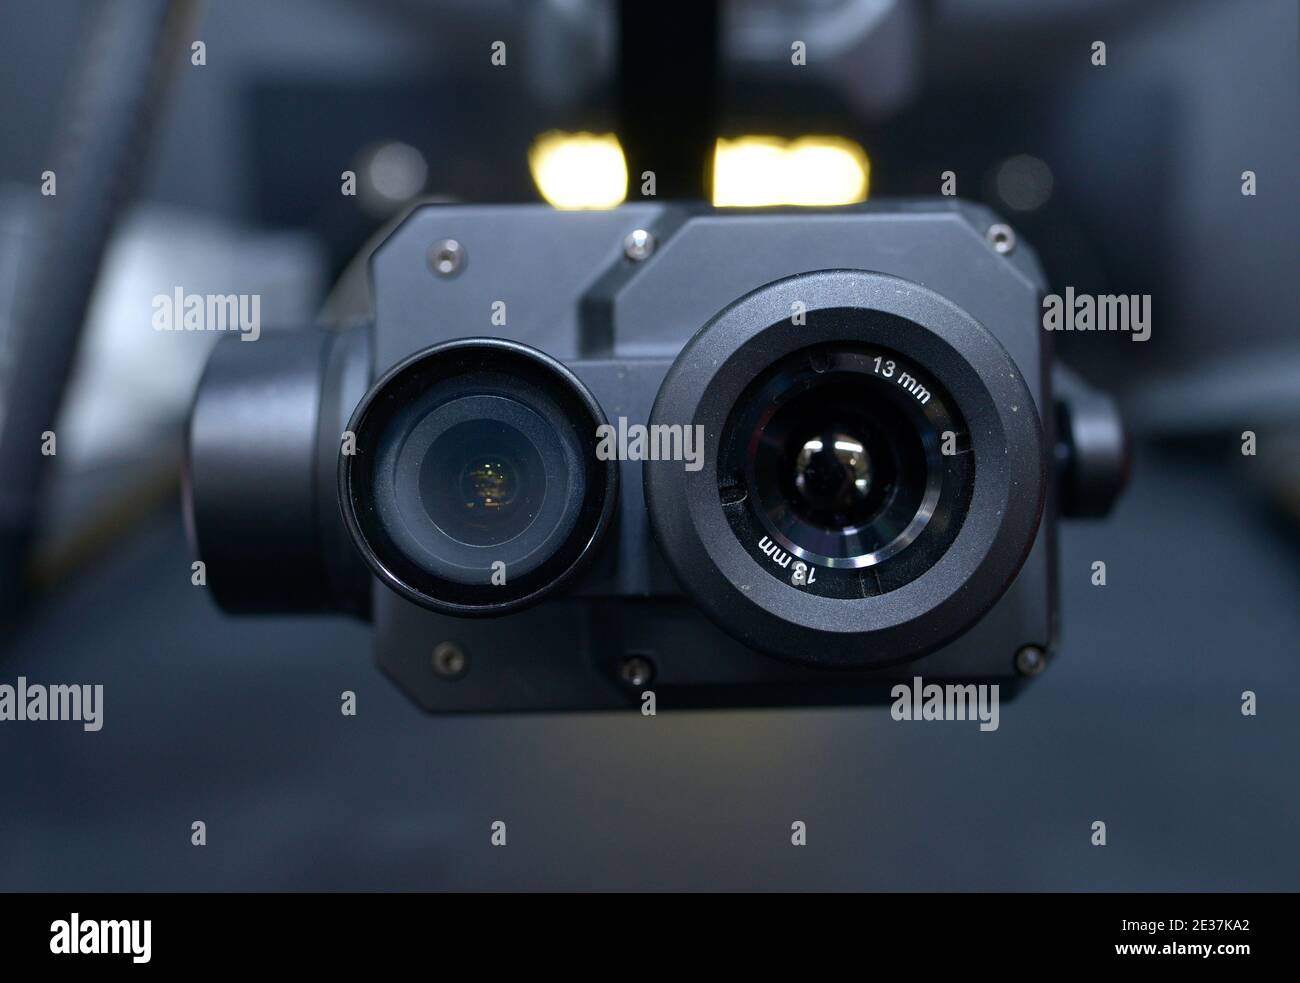 Dual lens camera designed for a Pro drones, placed on a stand Stock Photo -  Alamy